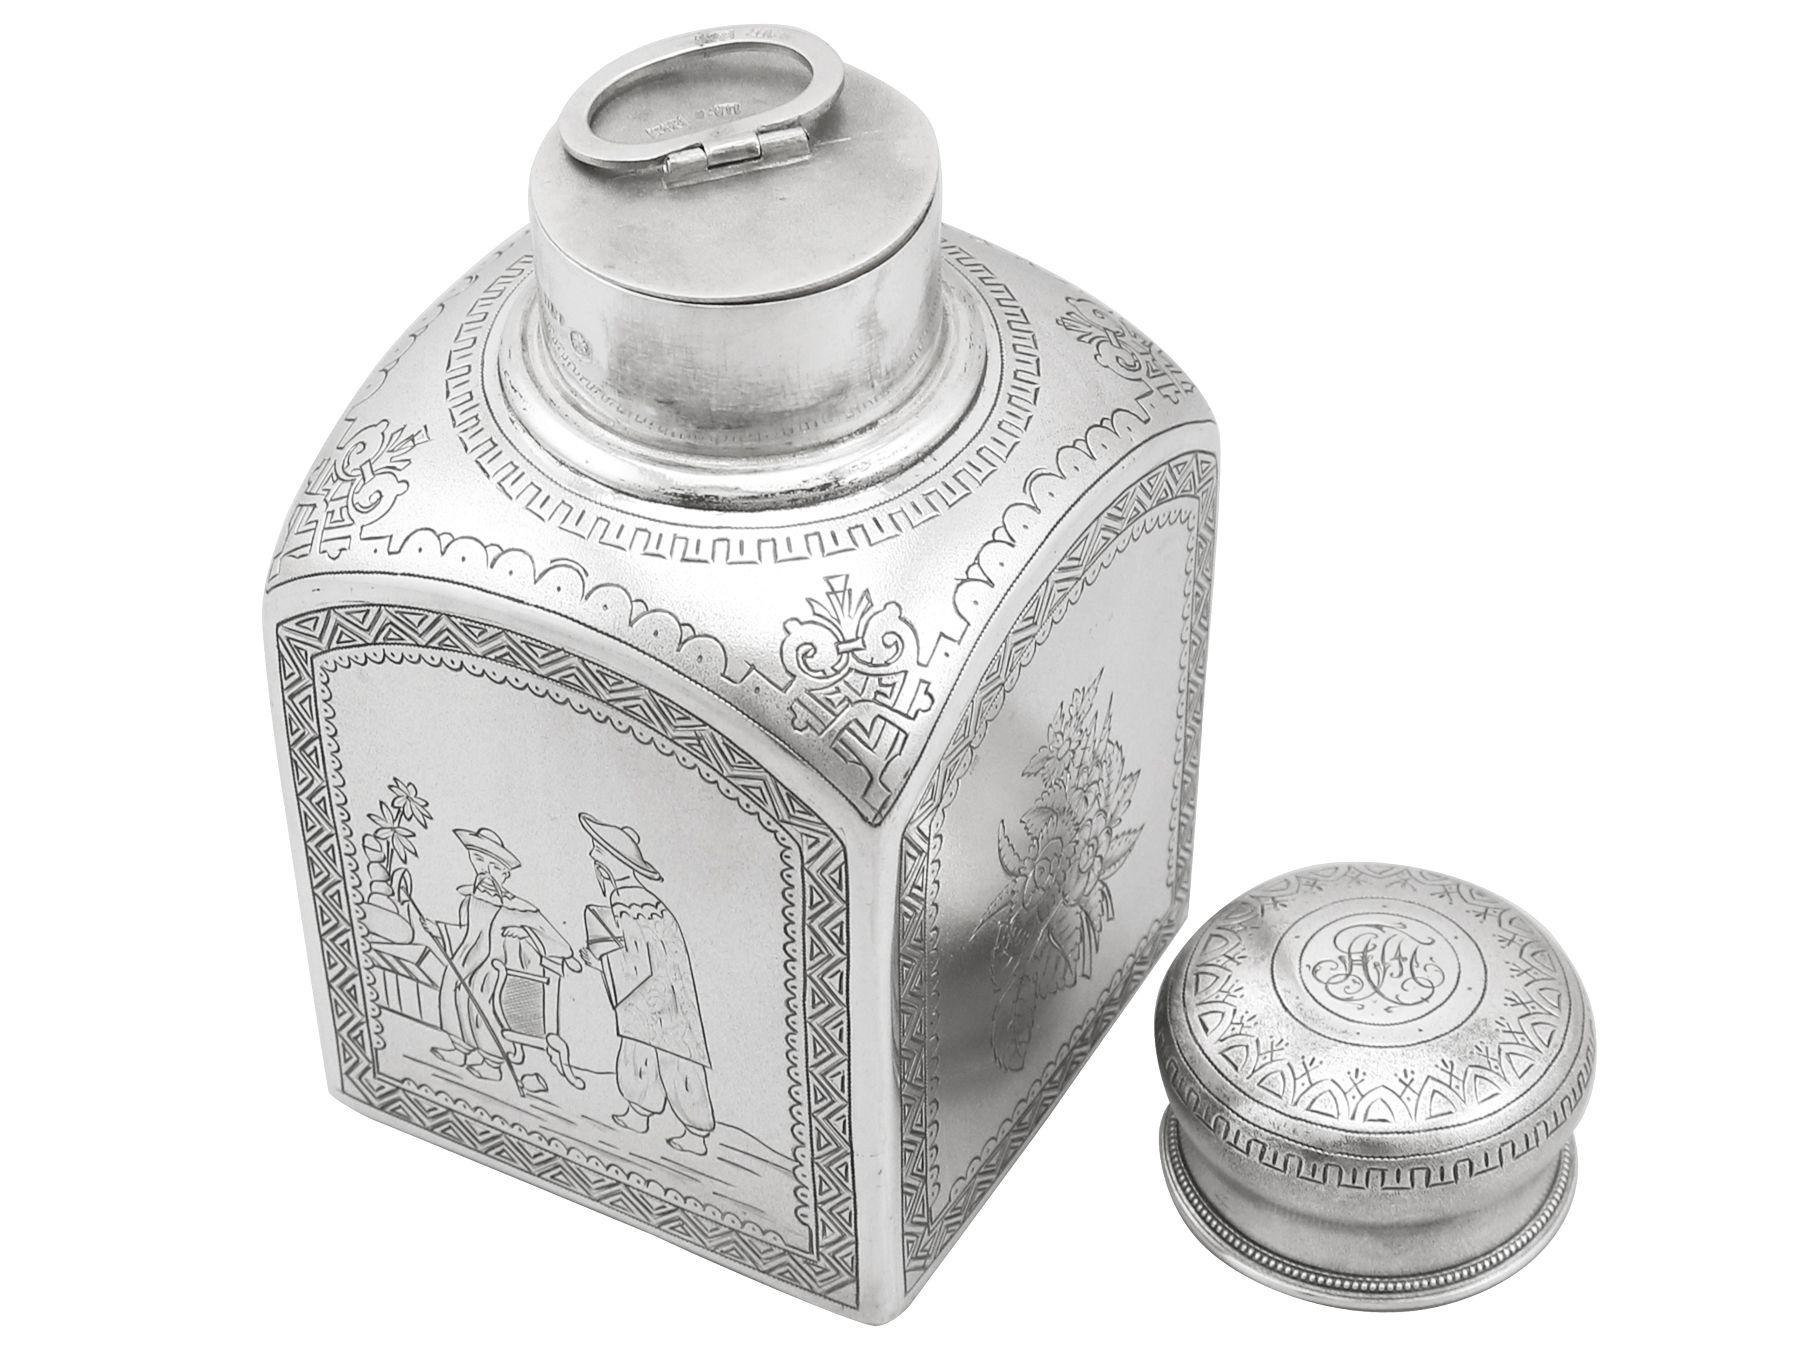 Other 1890s Antique Russian Silver Tea Caddy For Sale